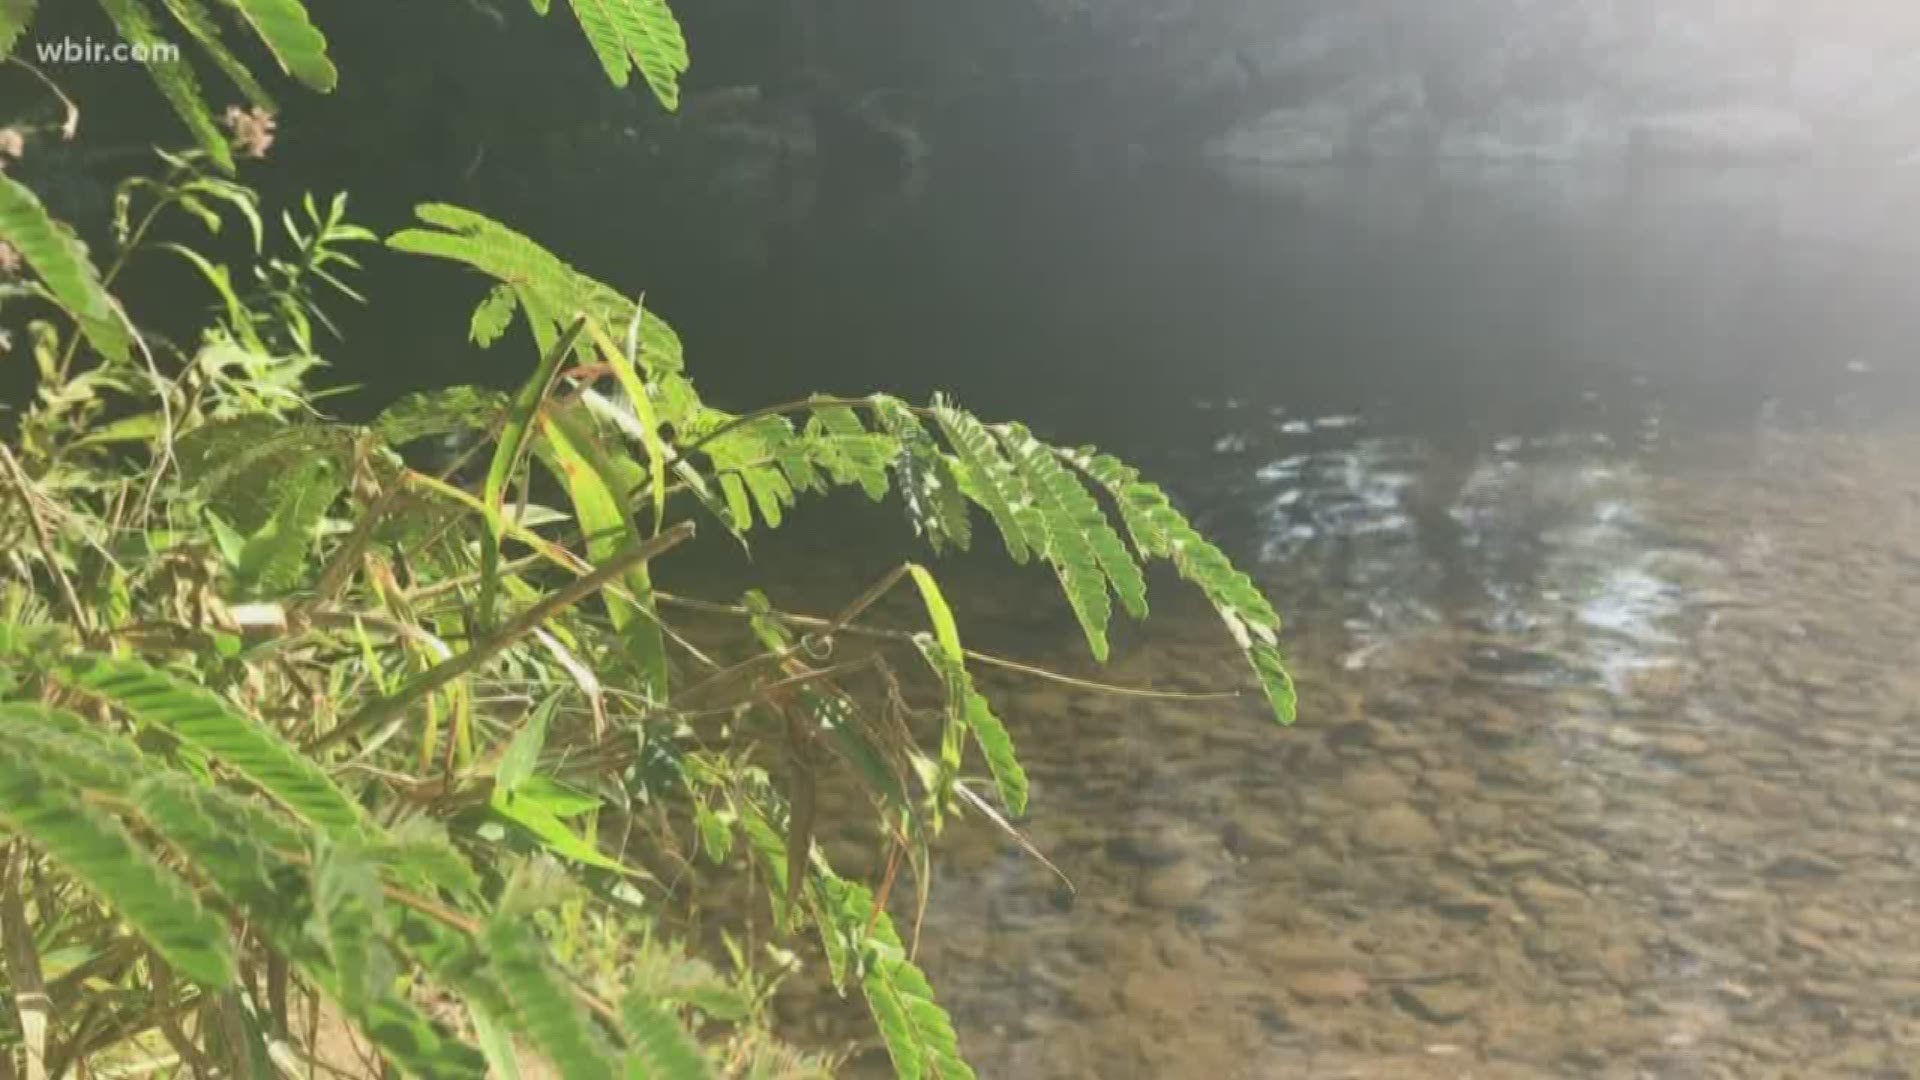 The Sevier County Rescue Squad is reminding people to wear life jackets when swimming. This comes after 50-year-old Mateo Morales Ruben drowned in the west prong of the Little Pigeon River Sunday night.